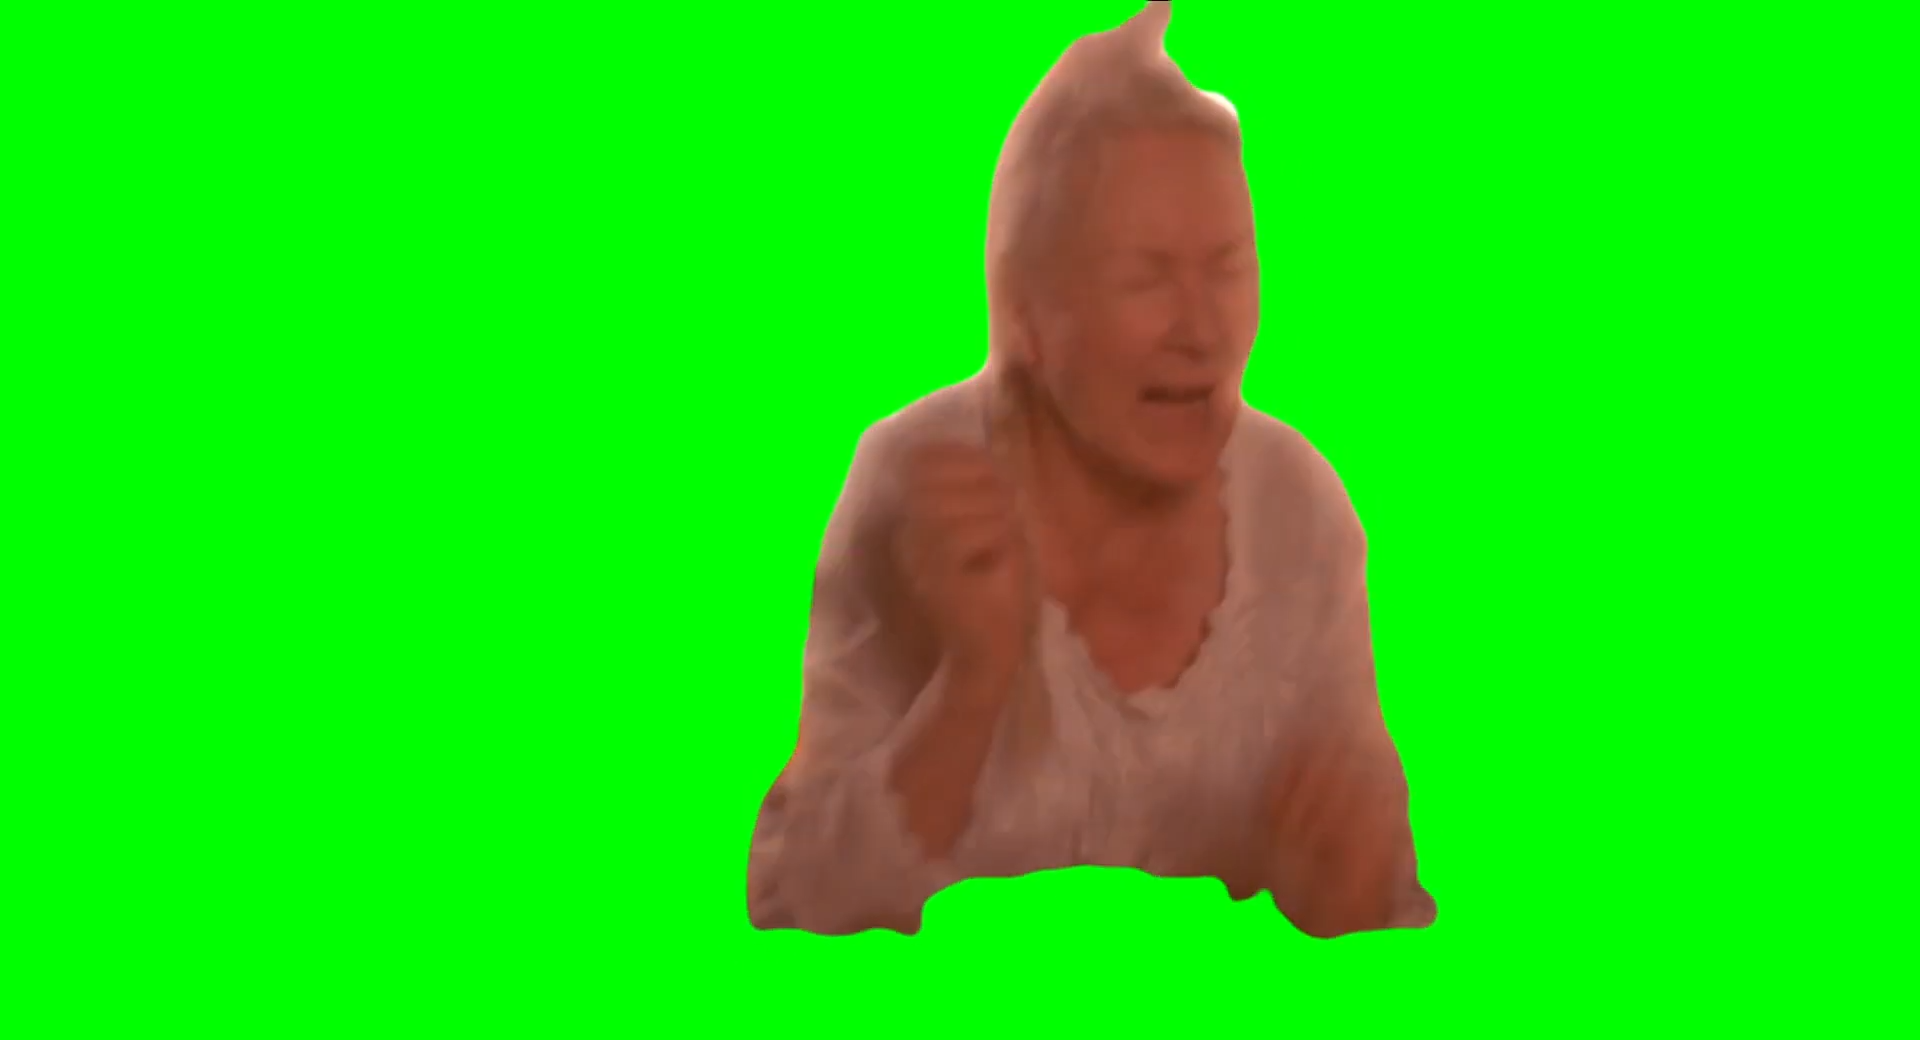 Aunt May praying explosion scene - Spider-Man 2002 (Green Screen)